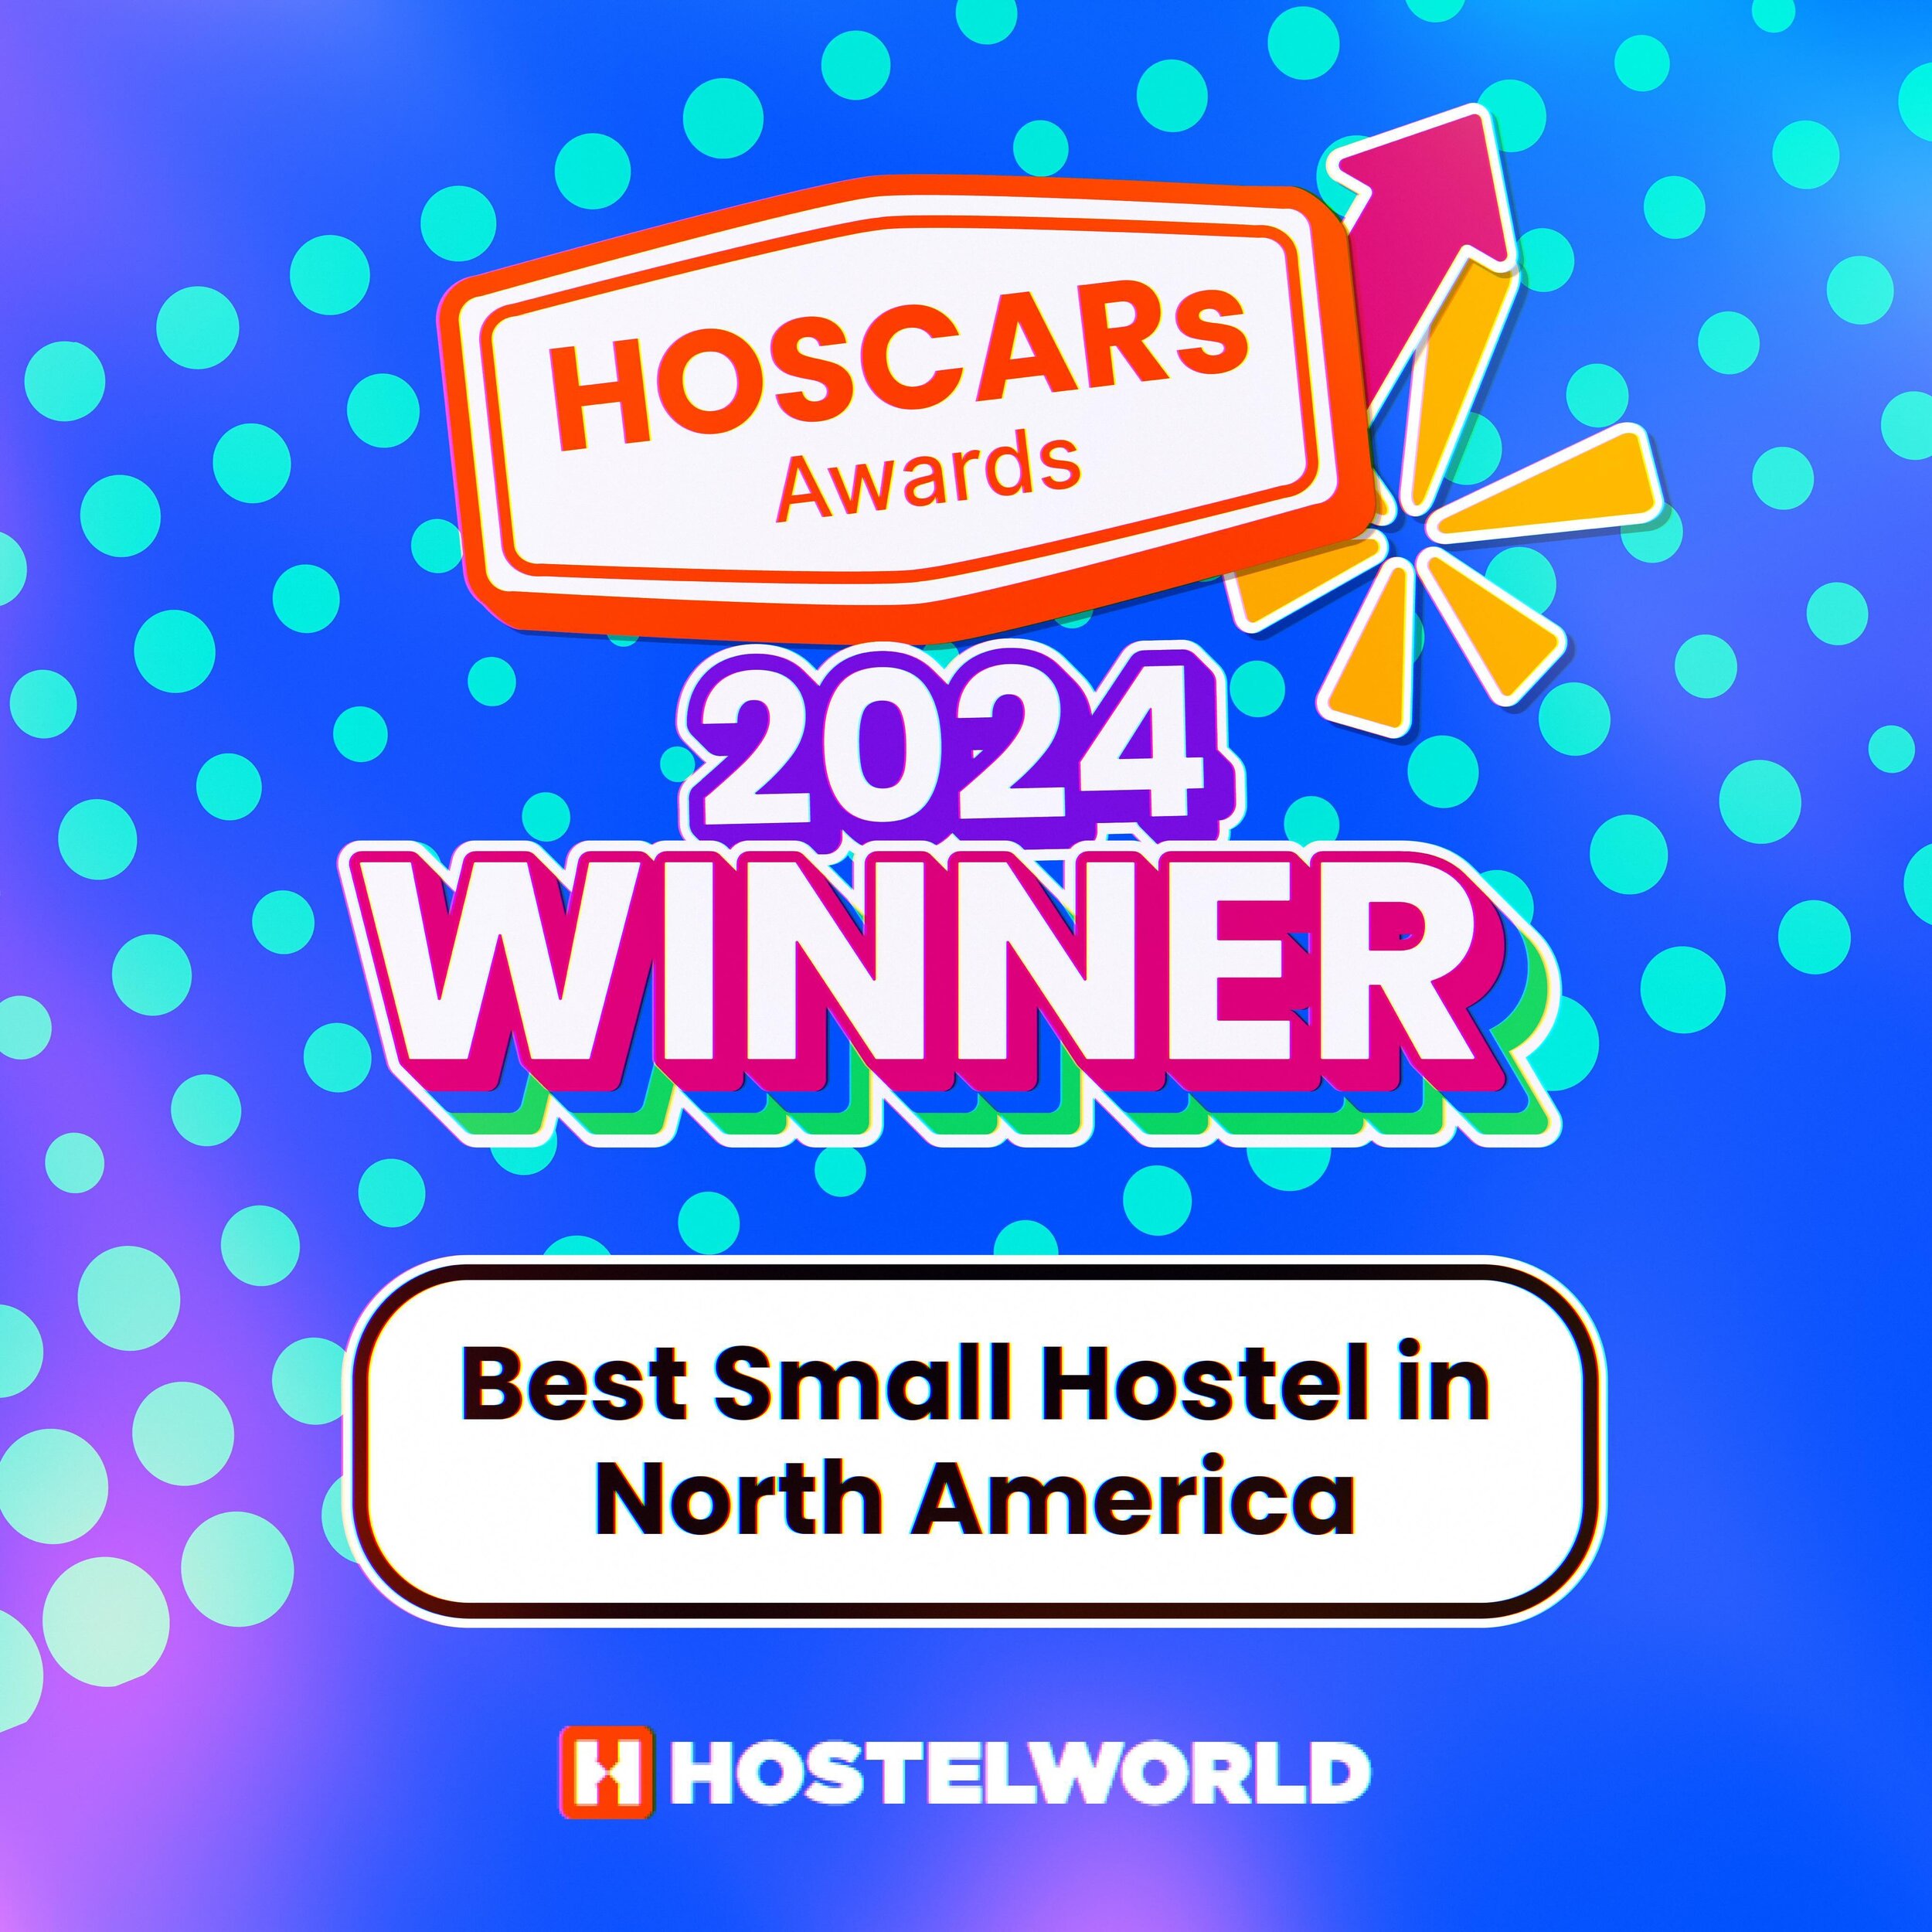 Drumroll please 🥁 Amazing news!  We have once again been blessed by our amazing guests and their fabulous reviews with Hostelworld&rsquo;s coveted HOSCARs award.  This time being named Best Small Hostel in North America.  We seriously couldn&rsquo;t